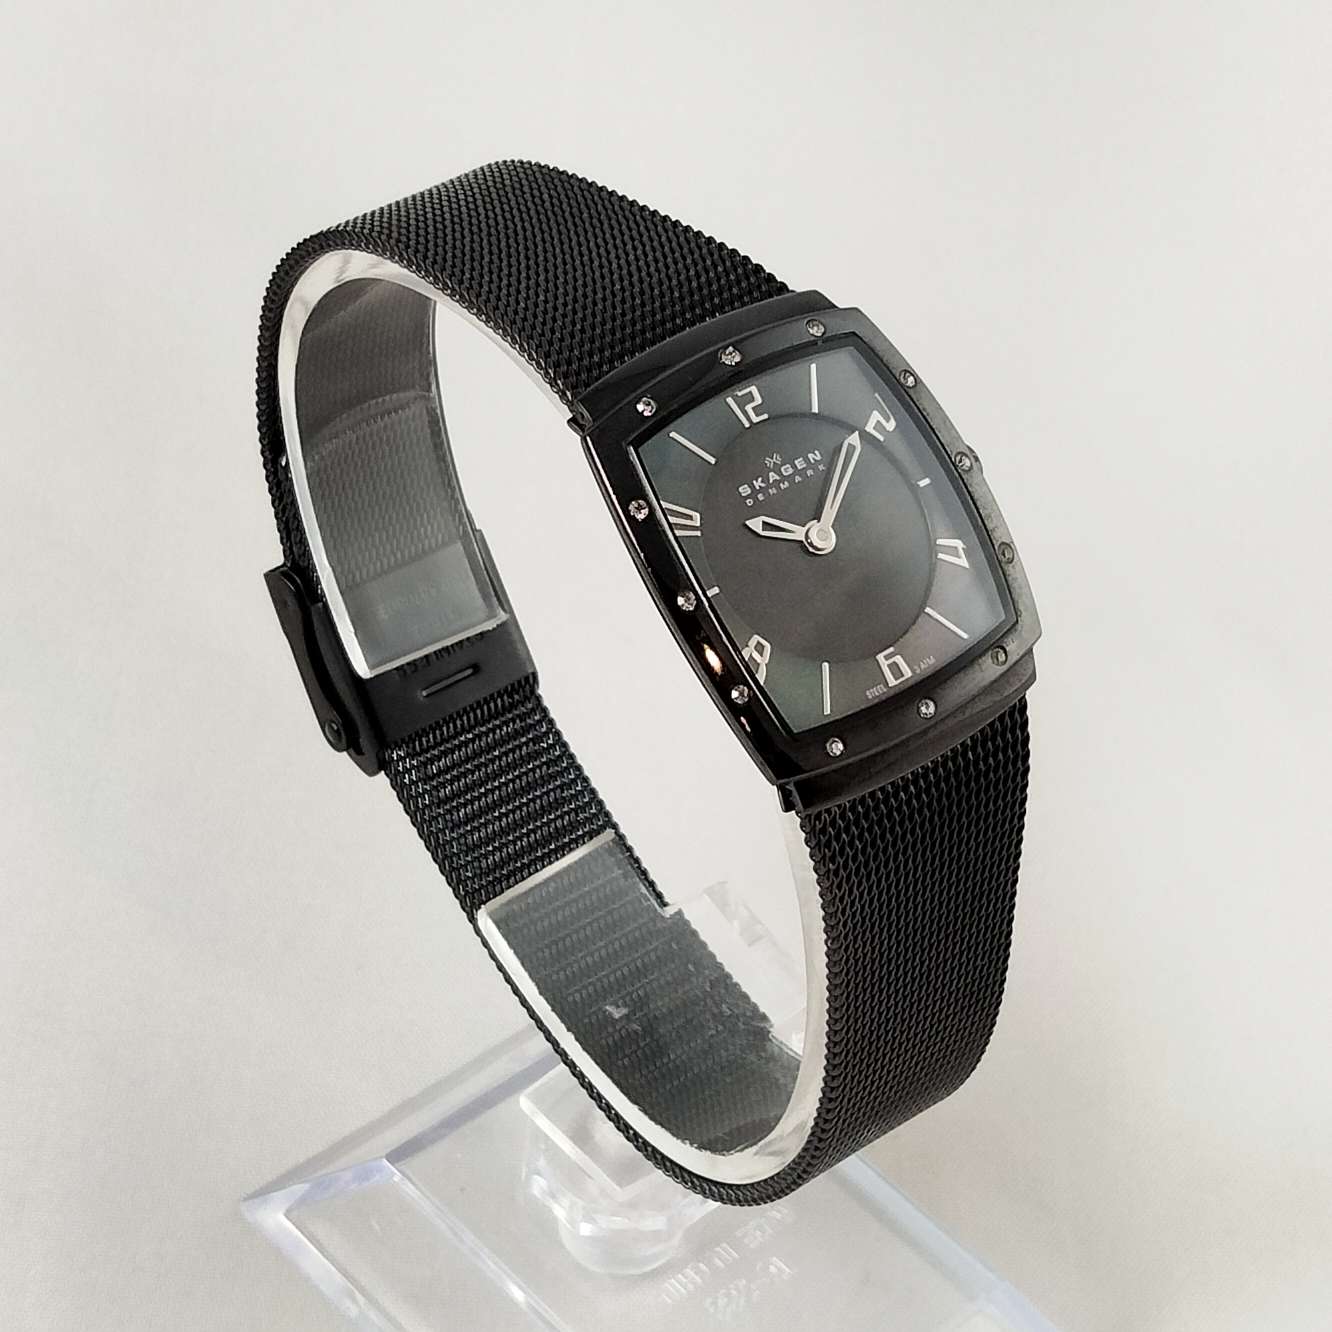 Skagen Unisex Watch, Black Mother of Pearl Dial with Jewel Details, Black Mesh Strap